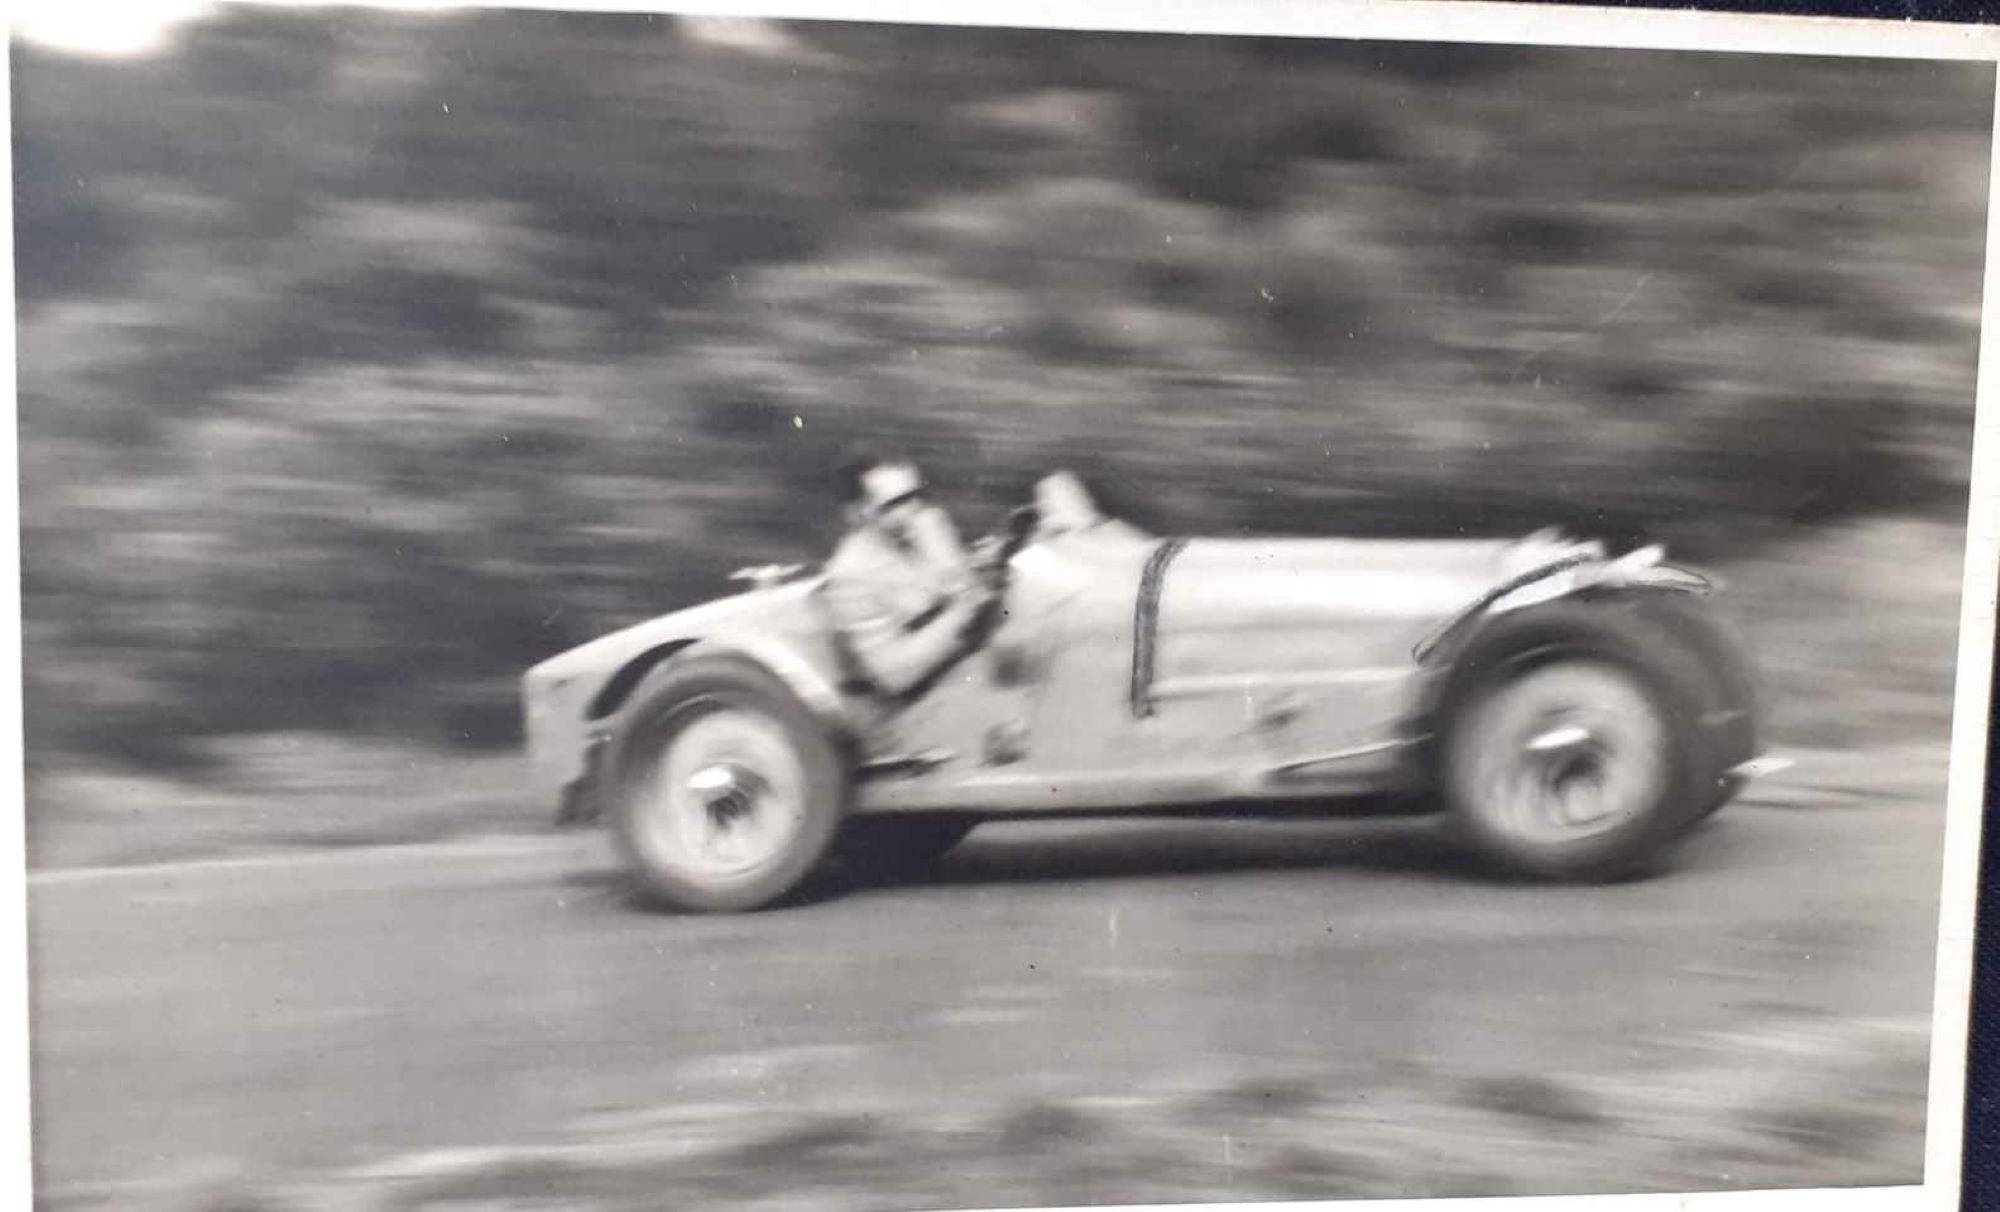 Name:  NSCC 1950 #0116 Bugatti T35 at speed - light colour 1950's - image Graeme Wells arch Anthony Wel.jpg
Views: 211
Size:  158.1 KB